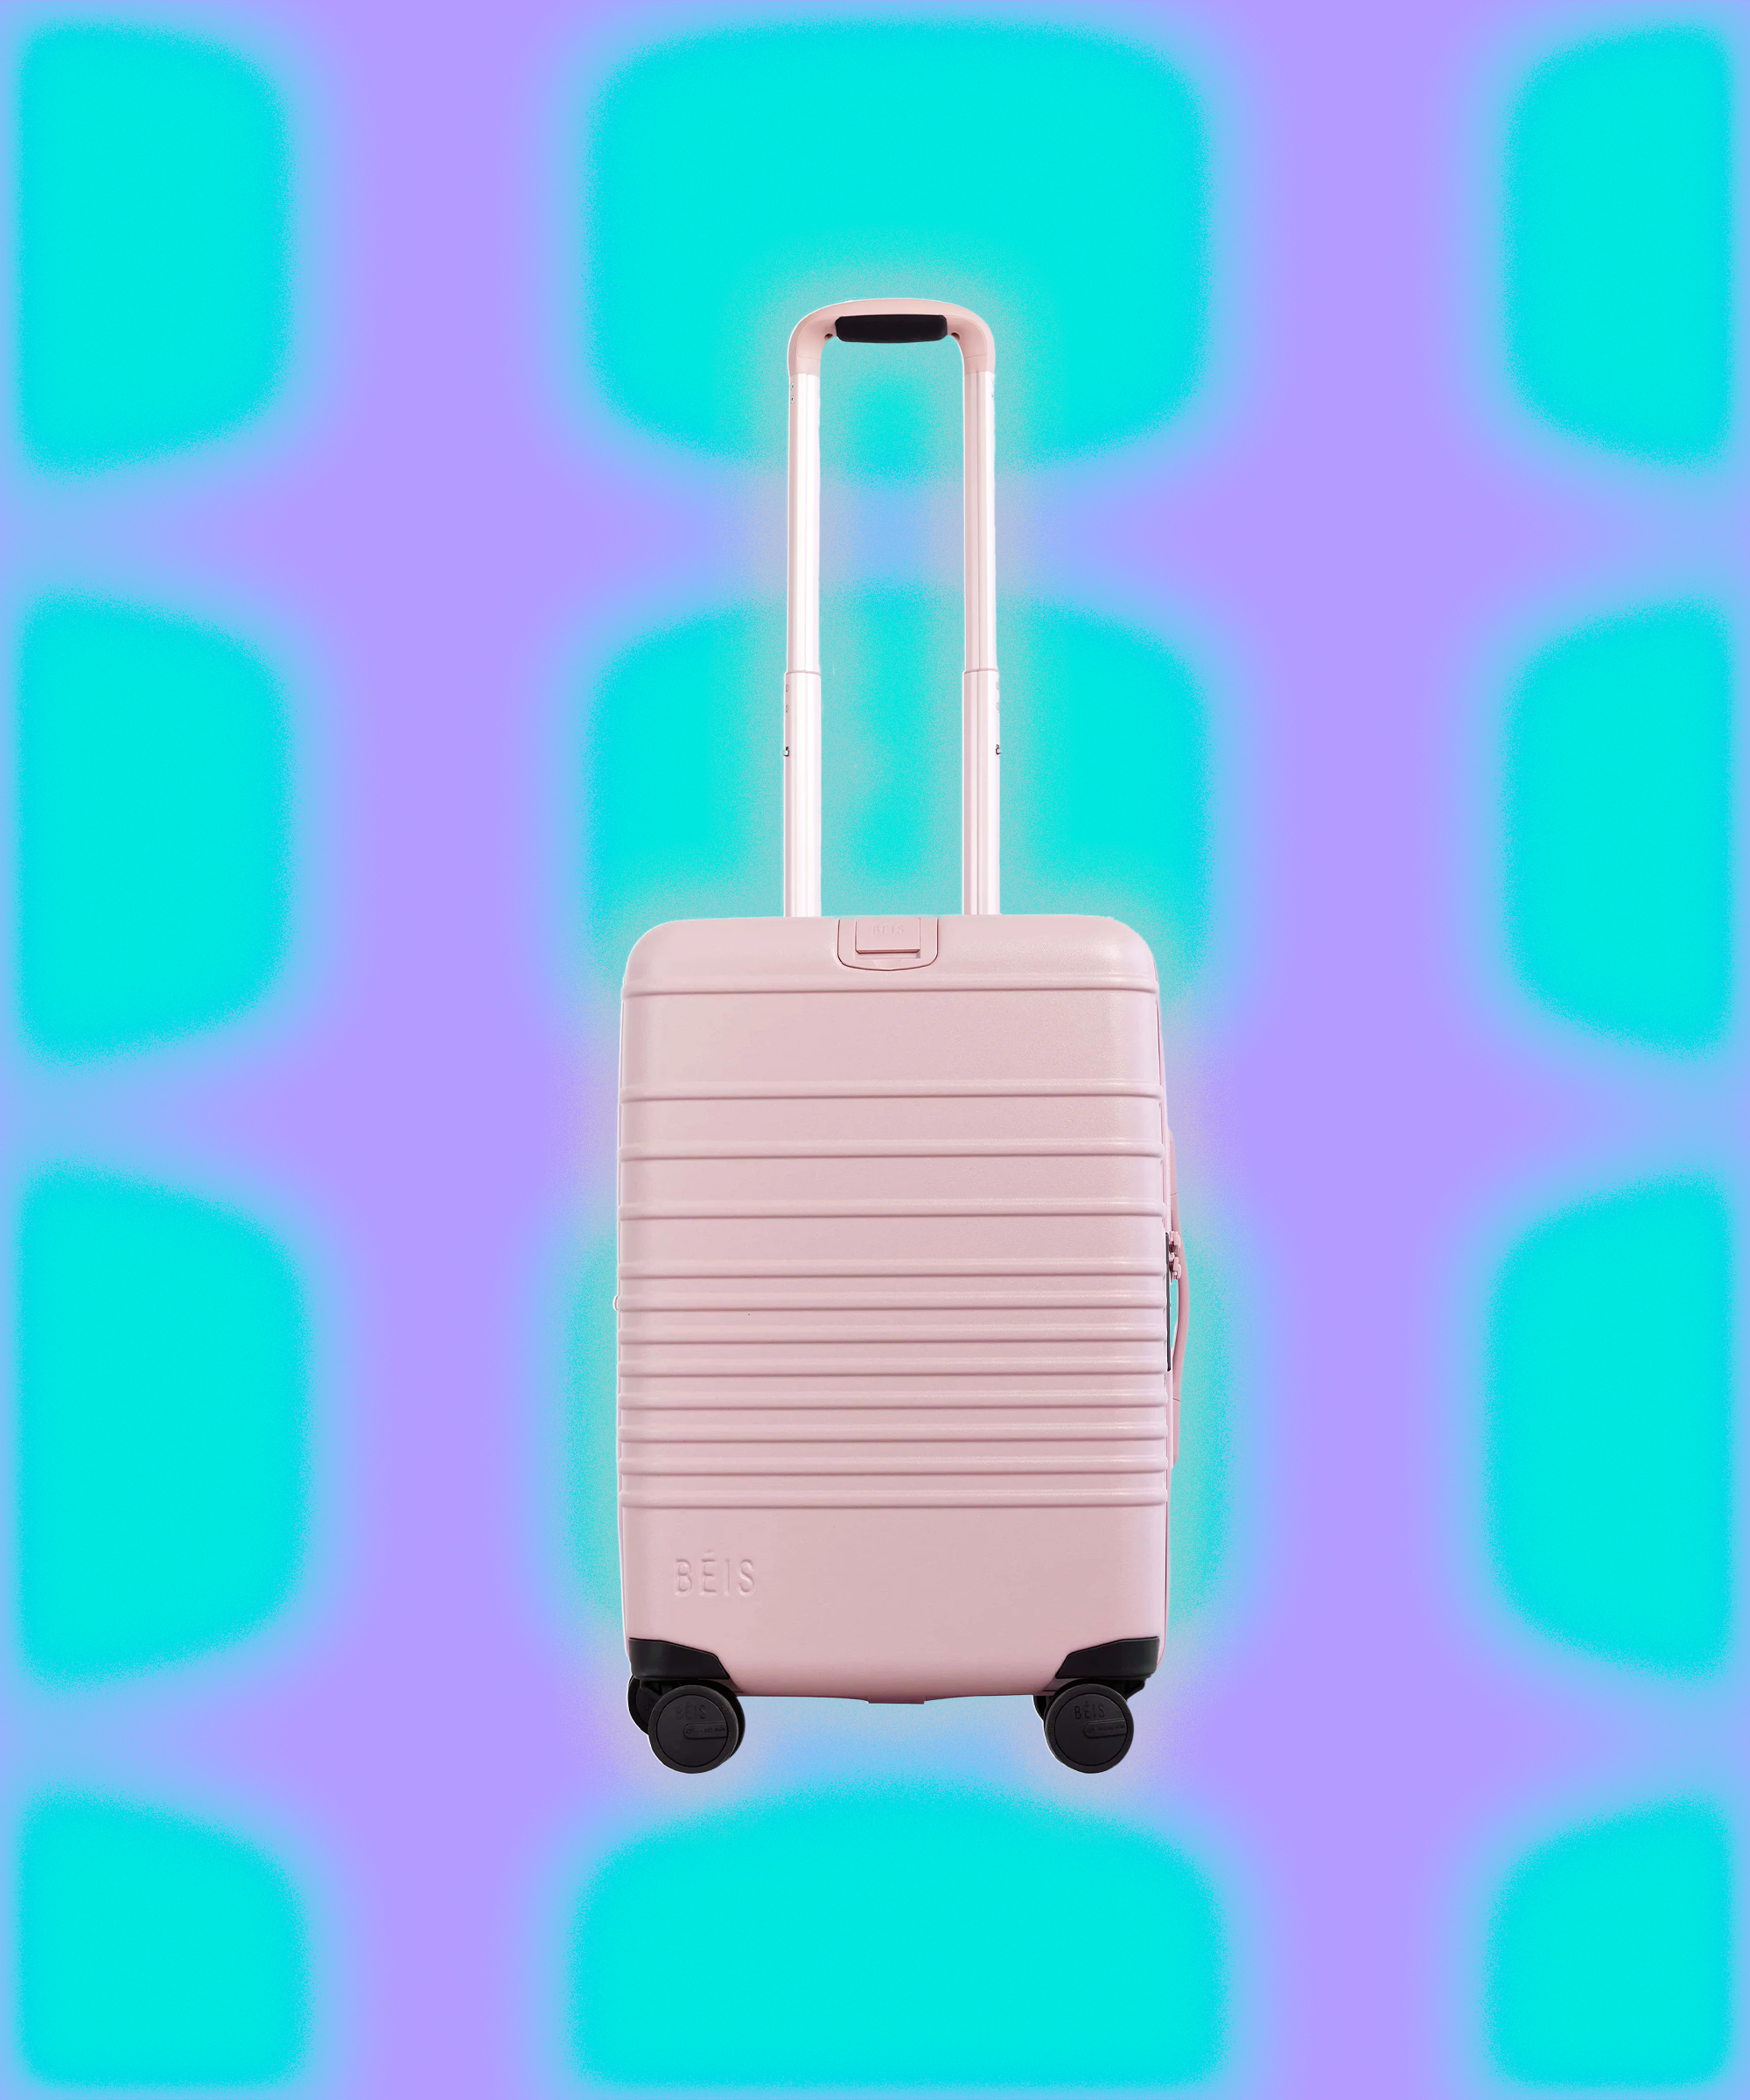 The Best Lightweight Luggage to Avoid Fees! (2021)